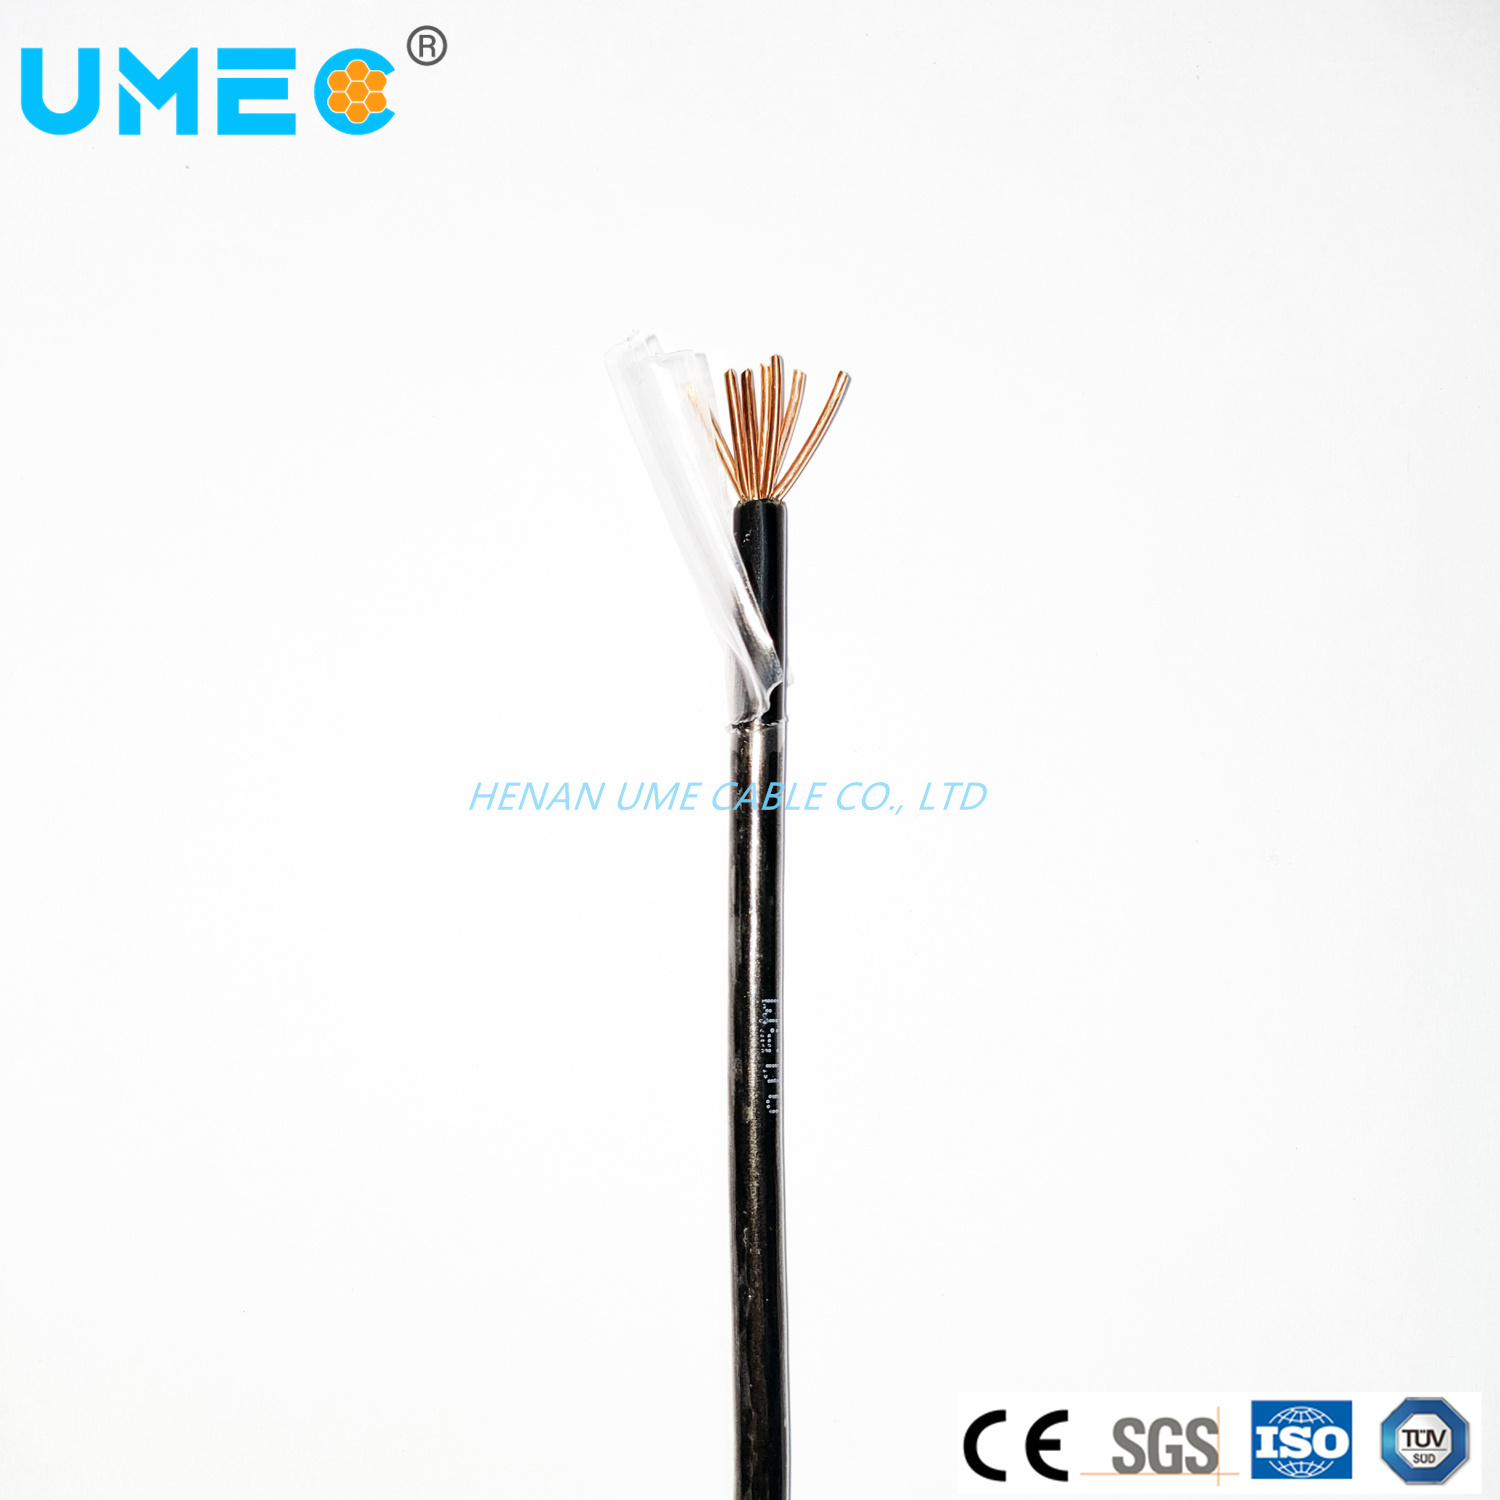 Wholesale Price Thw Cable Wire CE Certification Thhn/Thwn/Thwn-2 4/0~18AWG Nylon Jacket Electrical Building Wire Cable